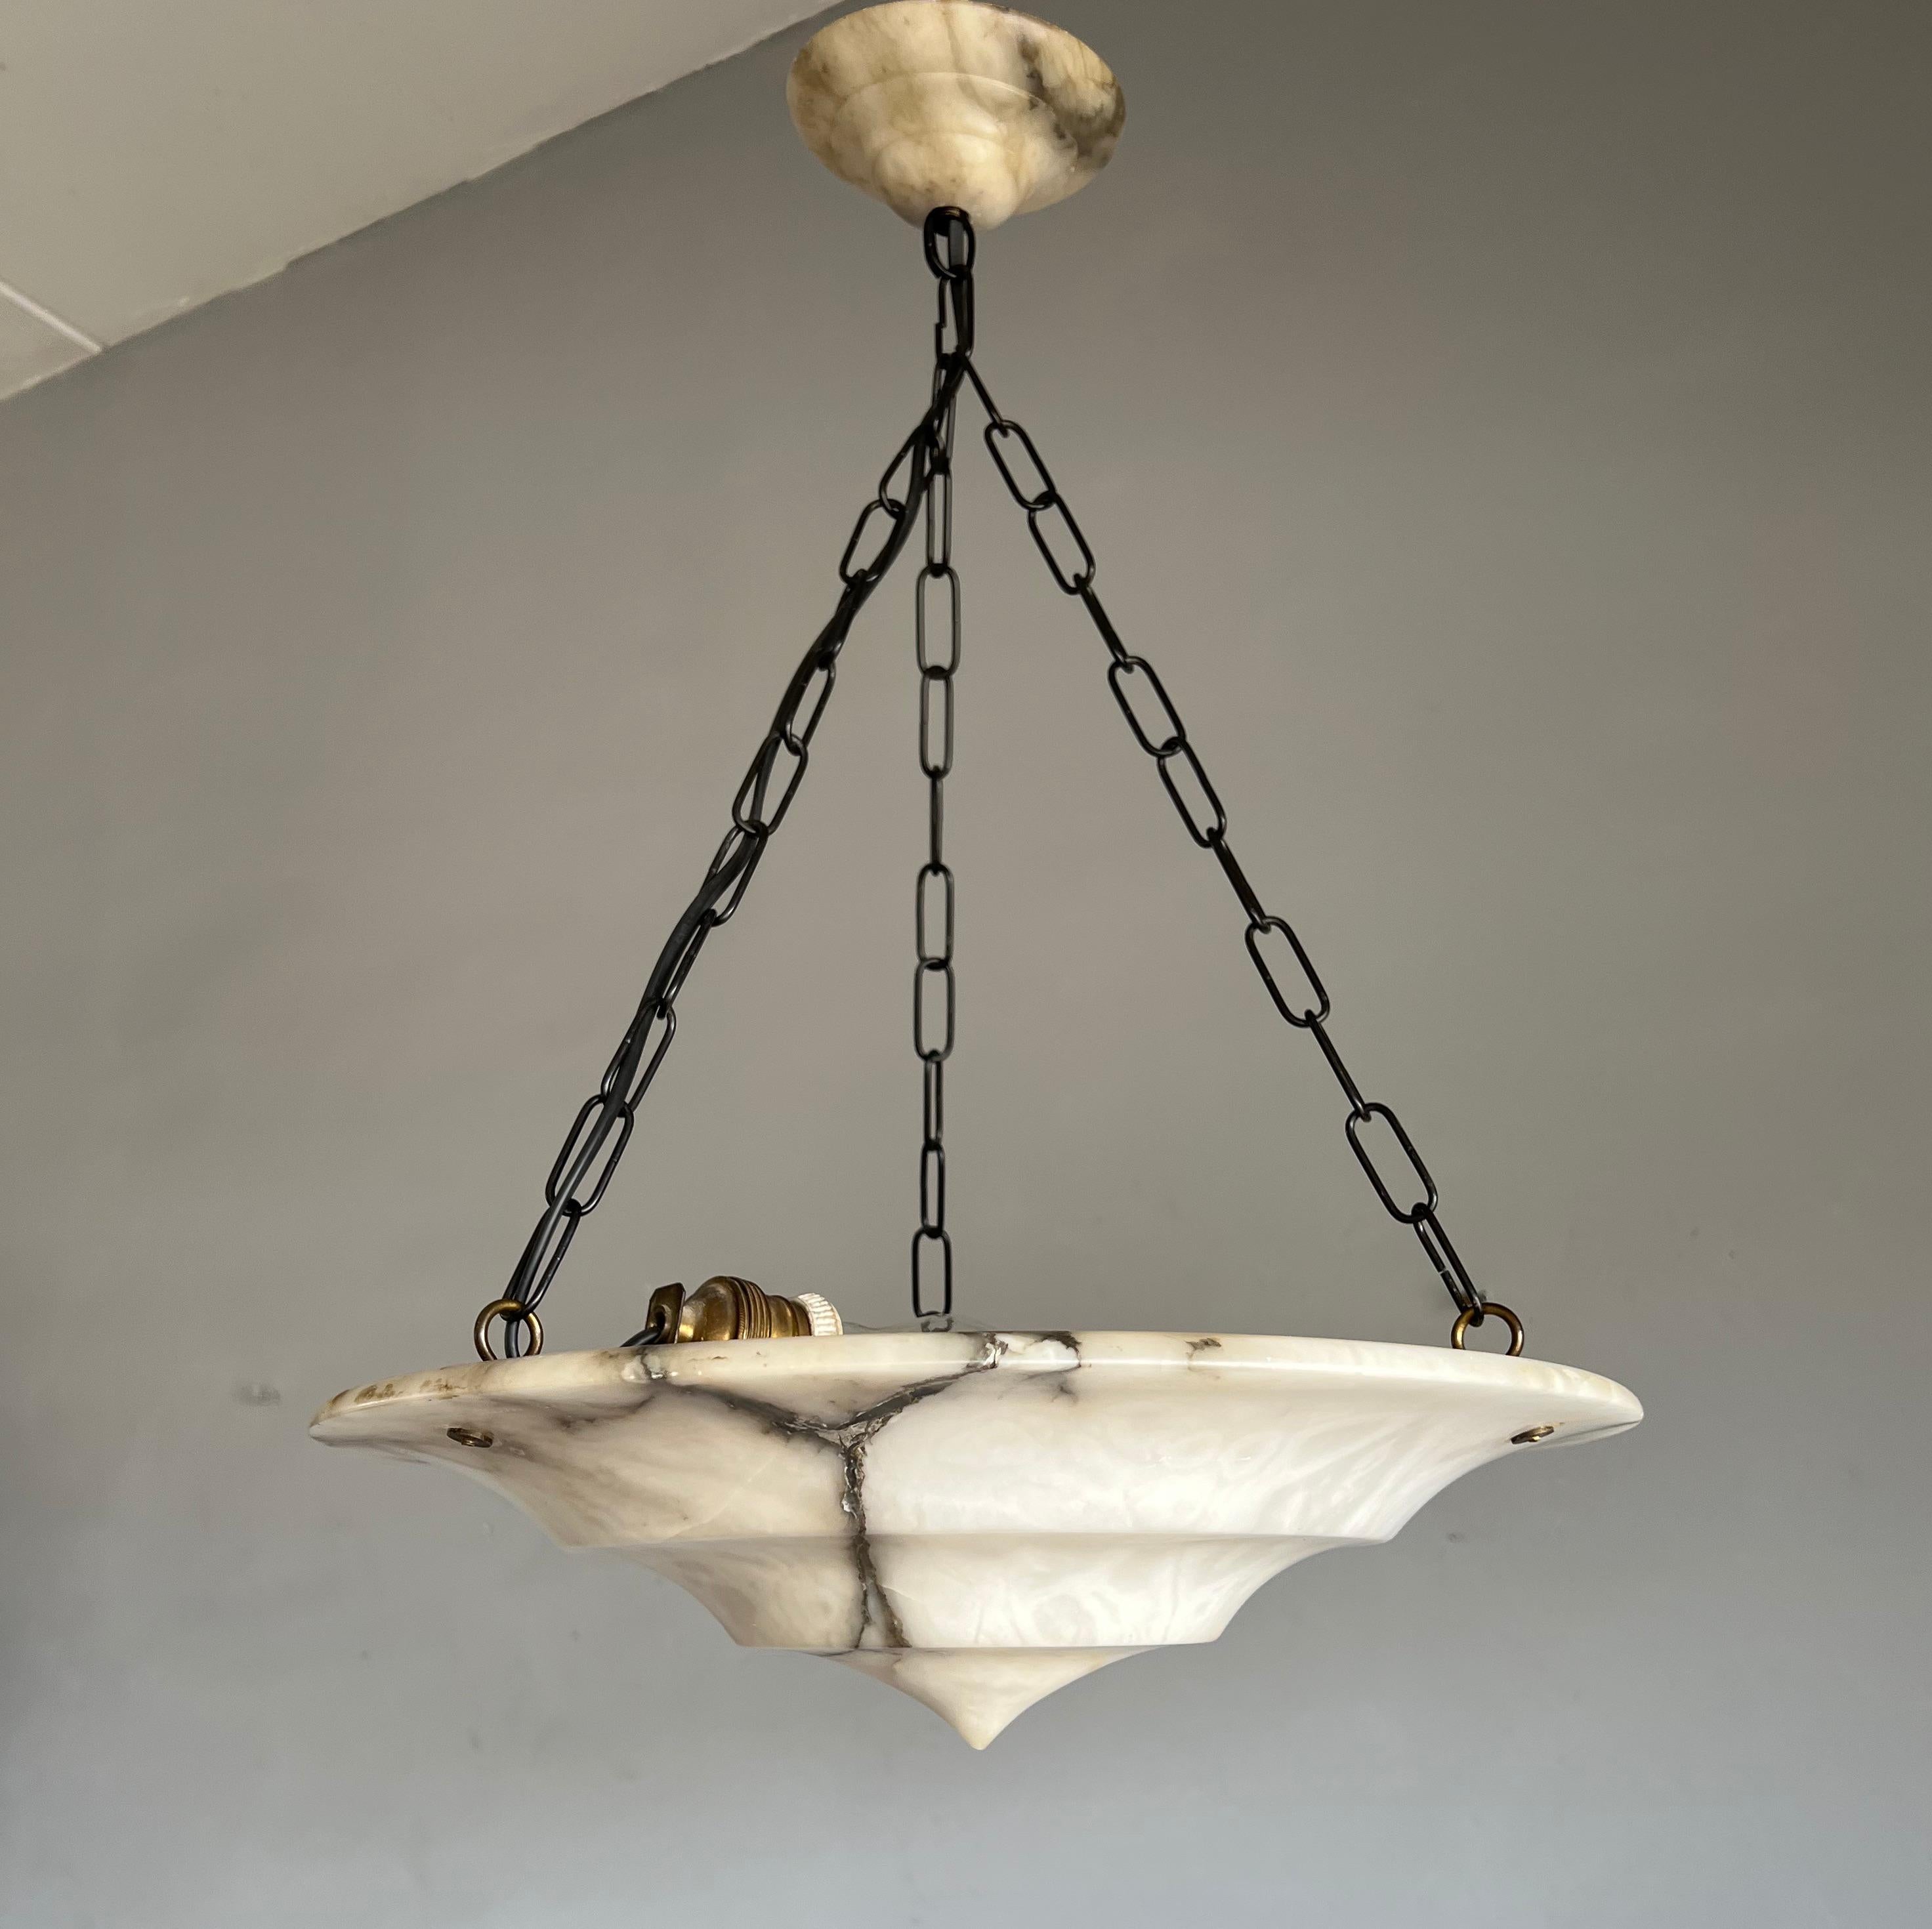 Unique and practical size, alabaster pendant of great quality and design.

This unique Art Deco fixture from the heydays of the European Art Deco era will light up both your days and evenings. Its remarkable, circular and layered shade is all hand